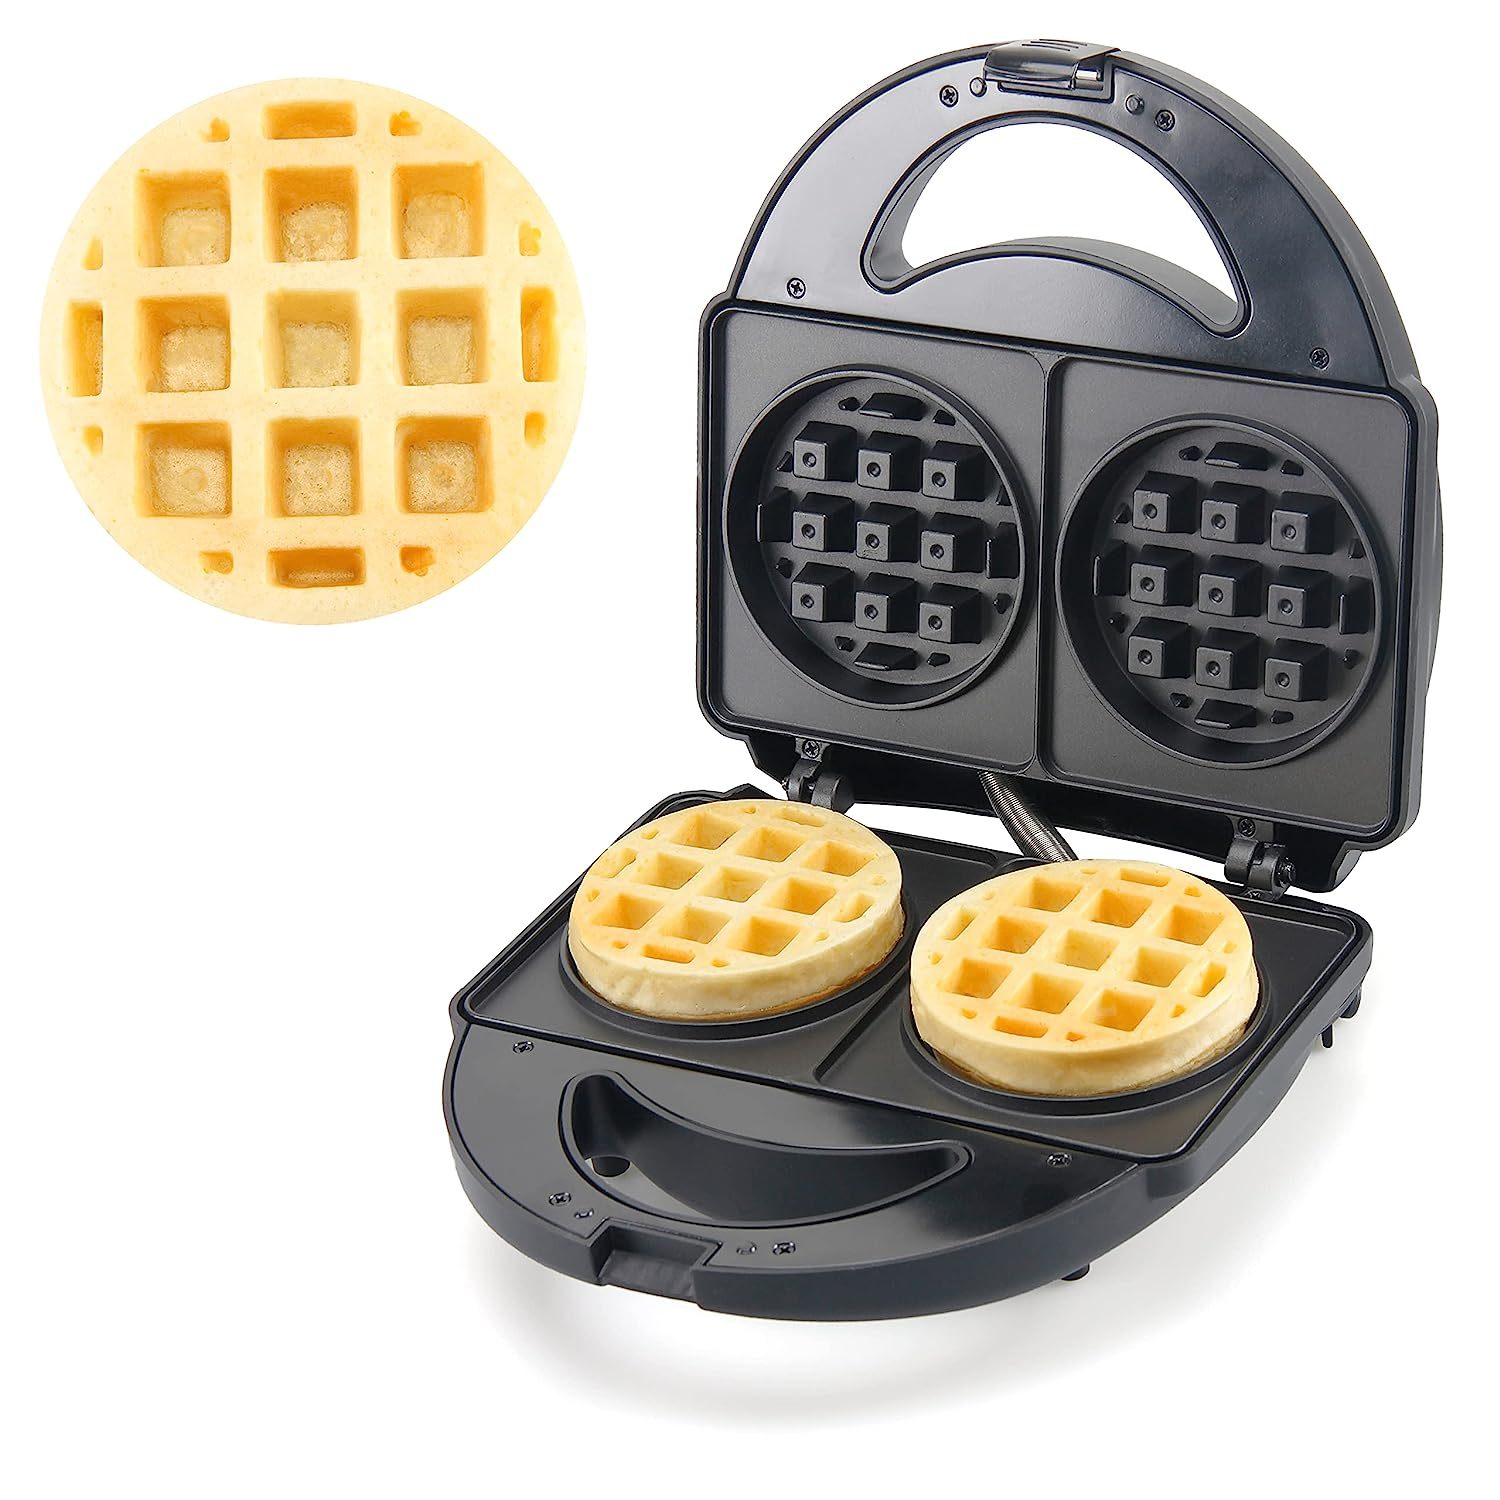 Primary image for Double Mini Waffle Maker With 4 Inch Dual Non Stick Surfaces, Excellent Small Be